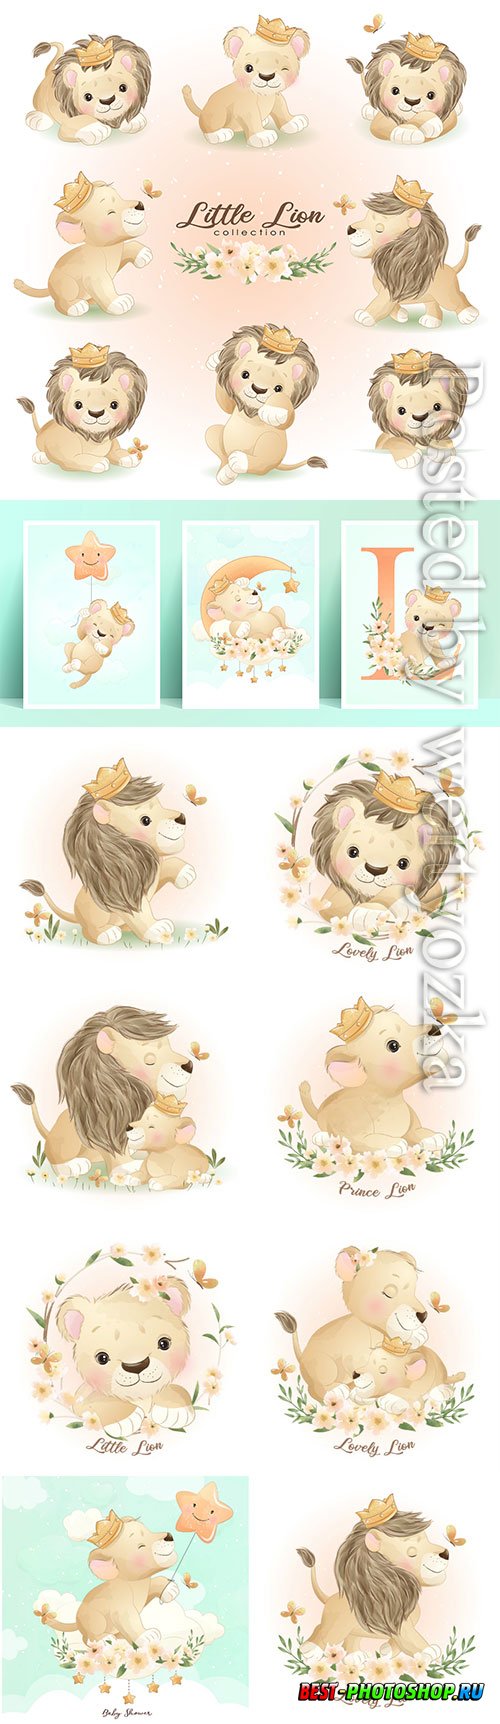 Cute doodle lion poses with floral vector illustration